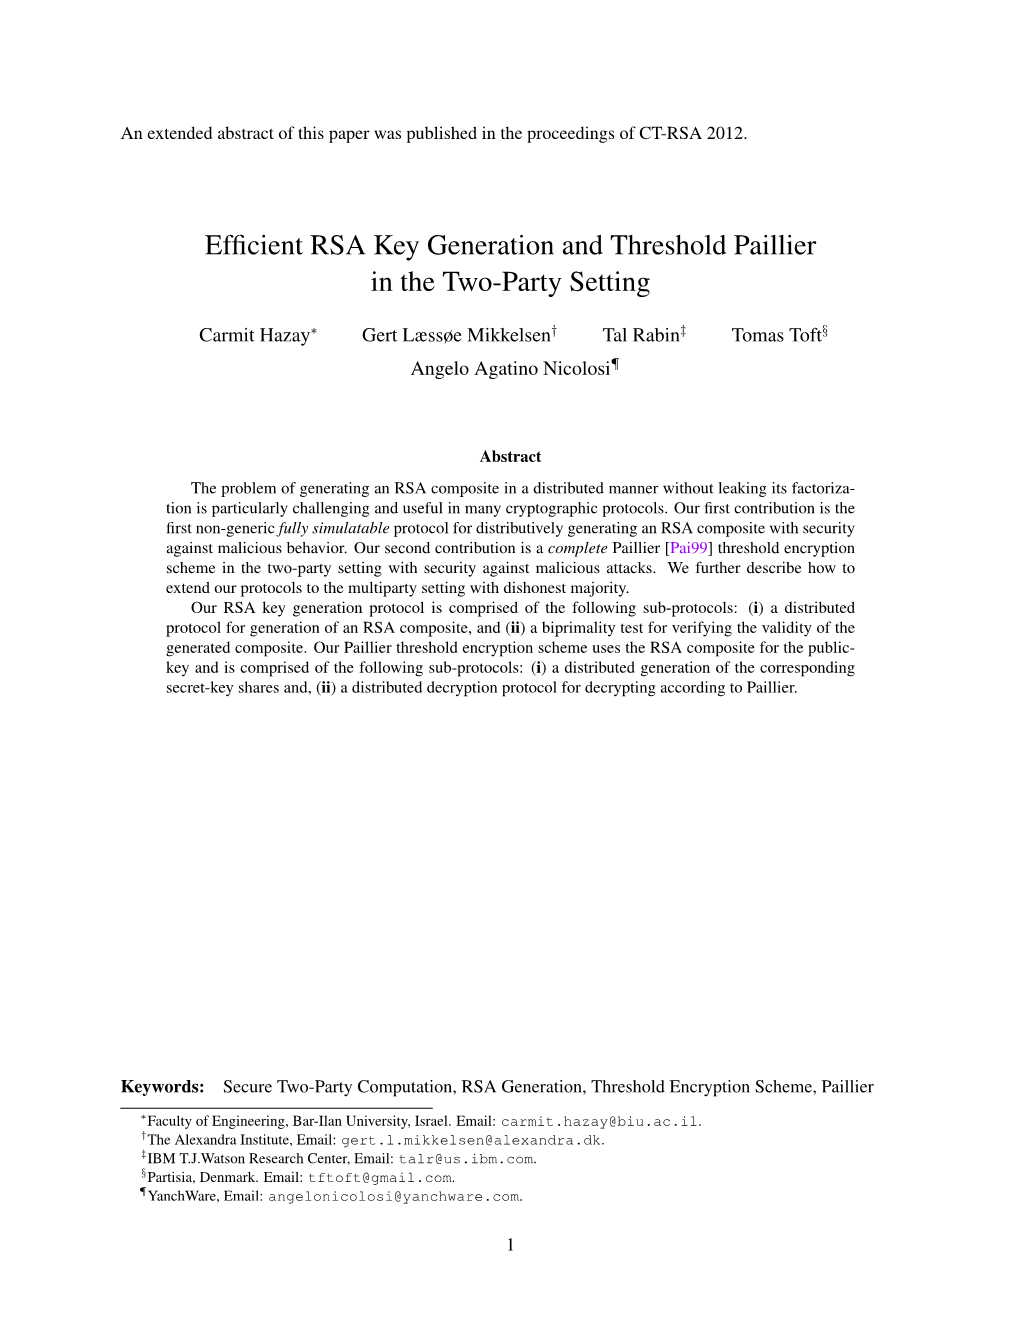 Efficient RSA Key Generation and Threshold Paillier in the Two-Party